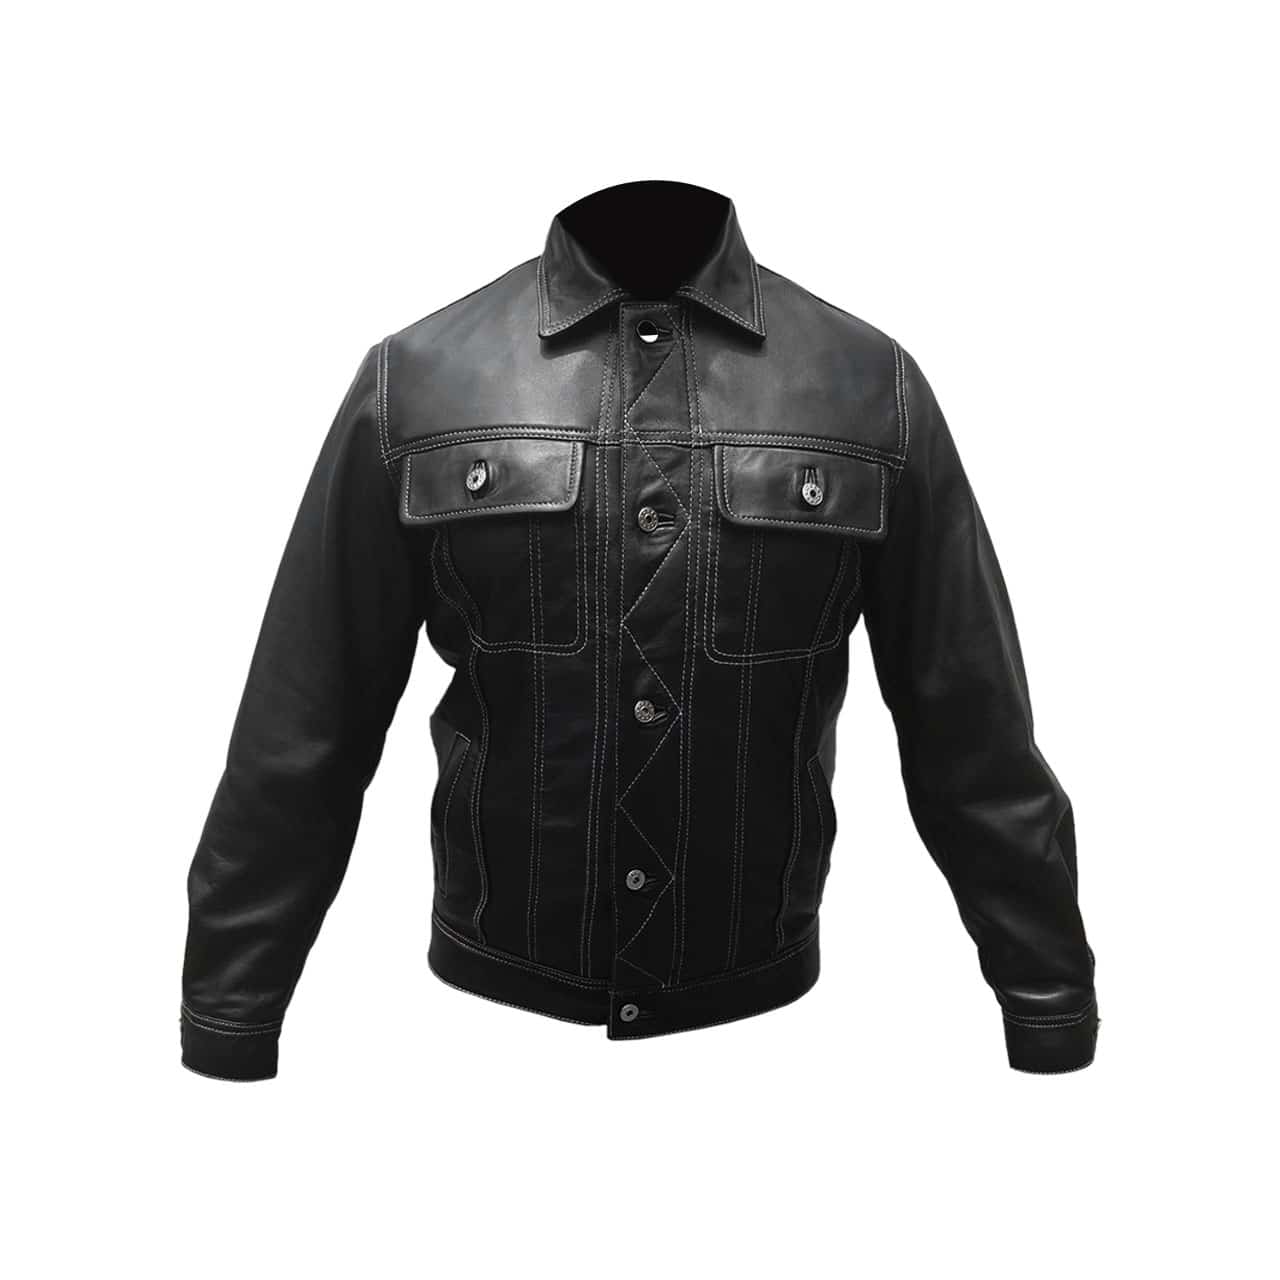 Mens Full Sleeve Jacket Shirt Very Hot Sheep or Cow Leather - (SHIRTS-2)